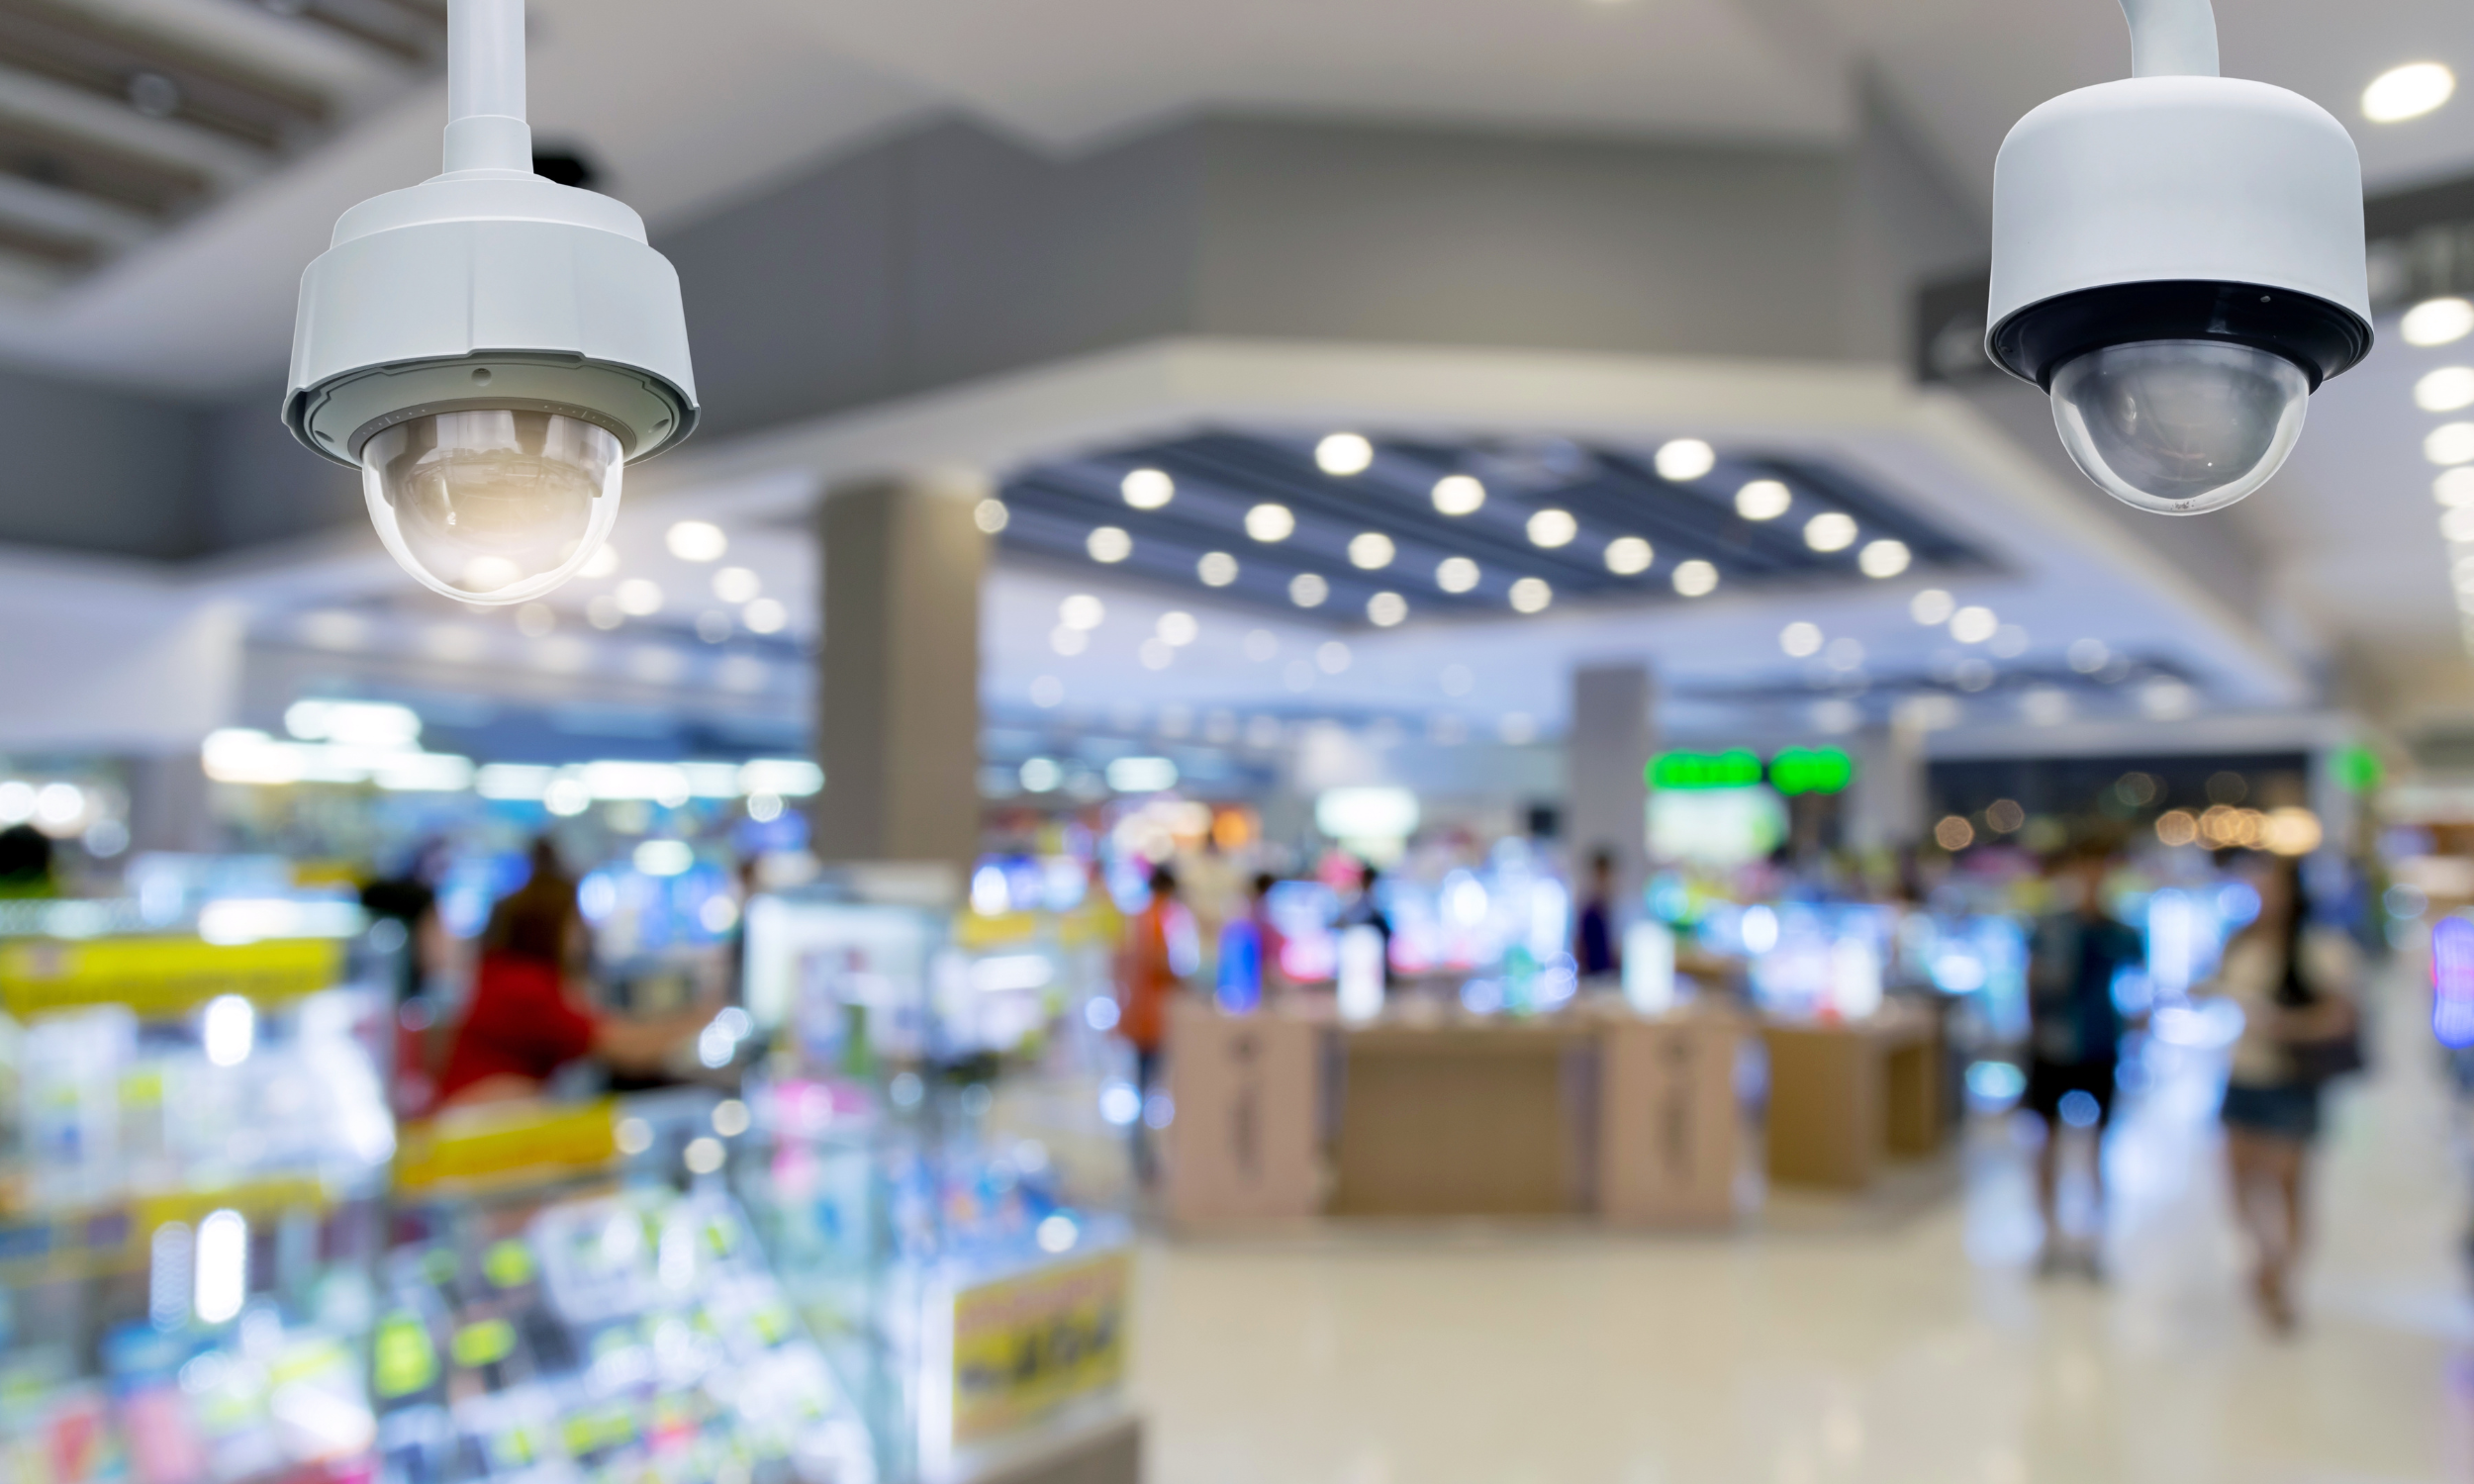 Security system for retail